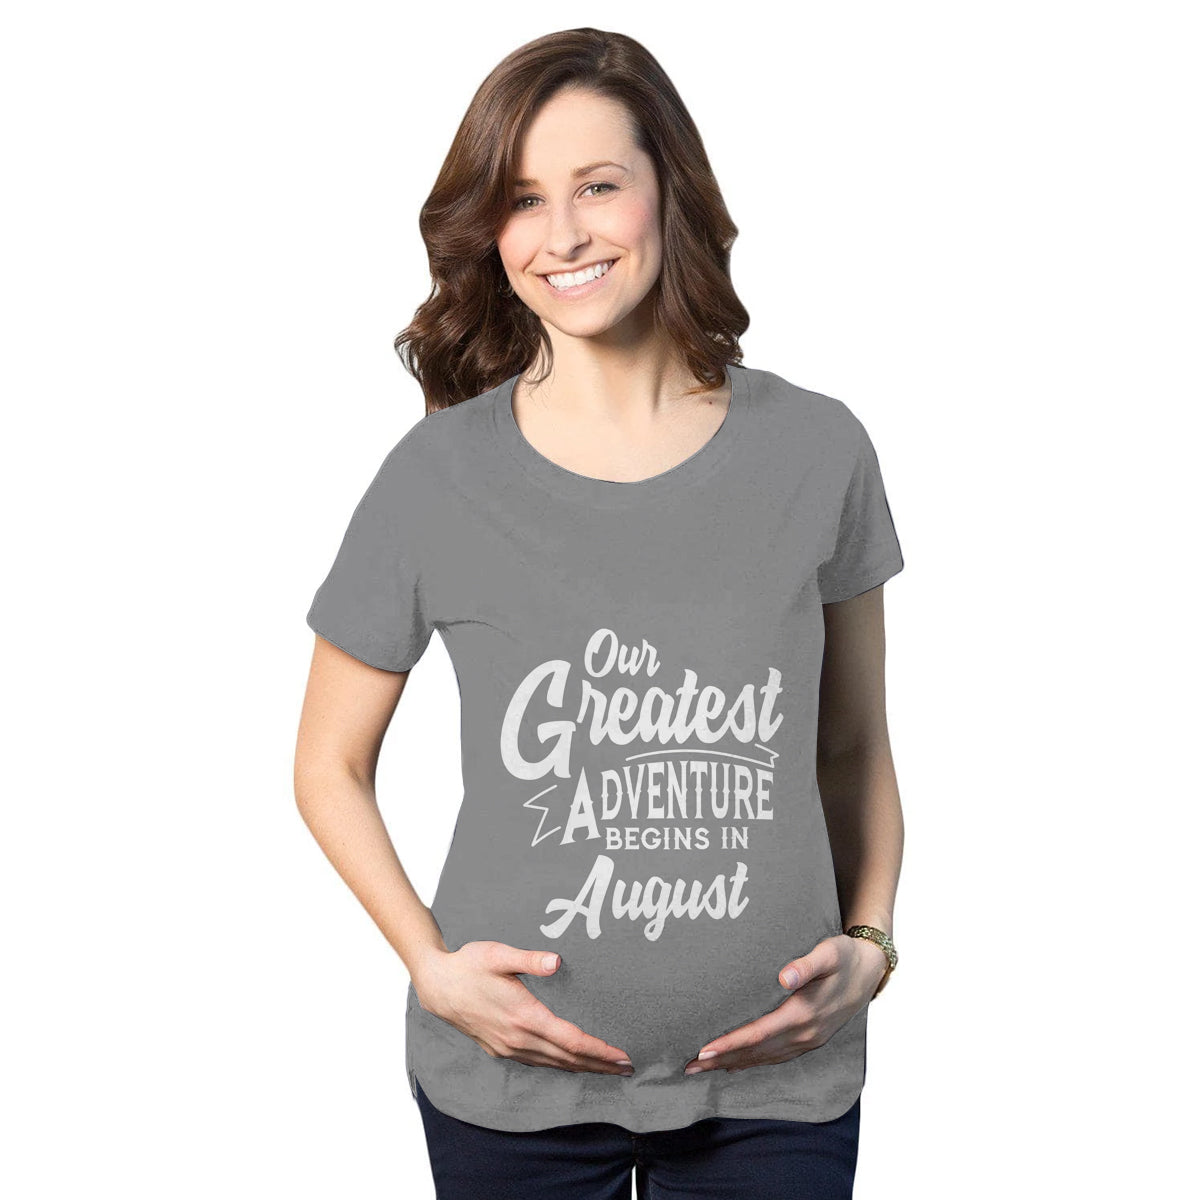 Our Greatest Adventure Begins in August Maternity T-Shirt